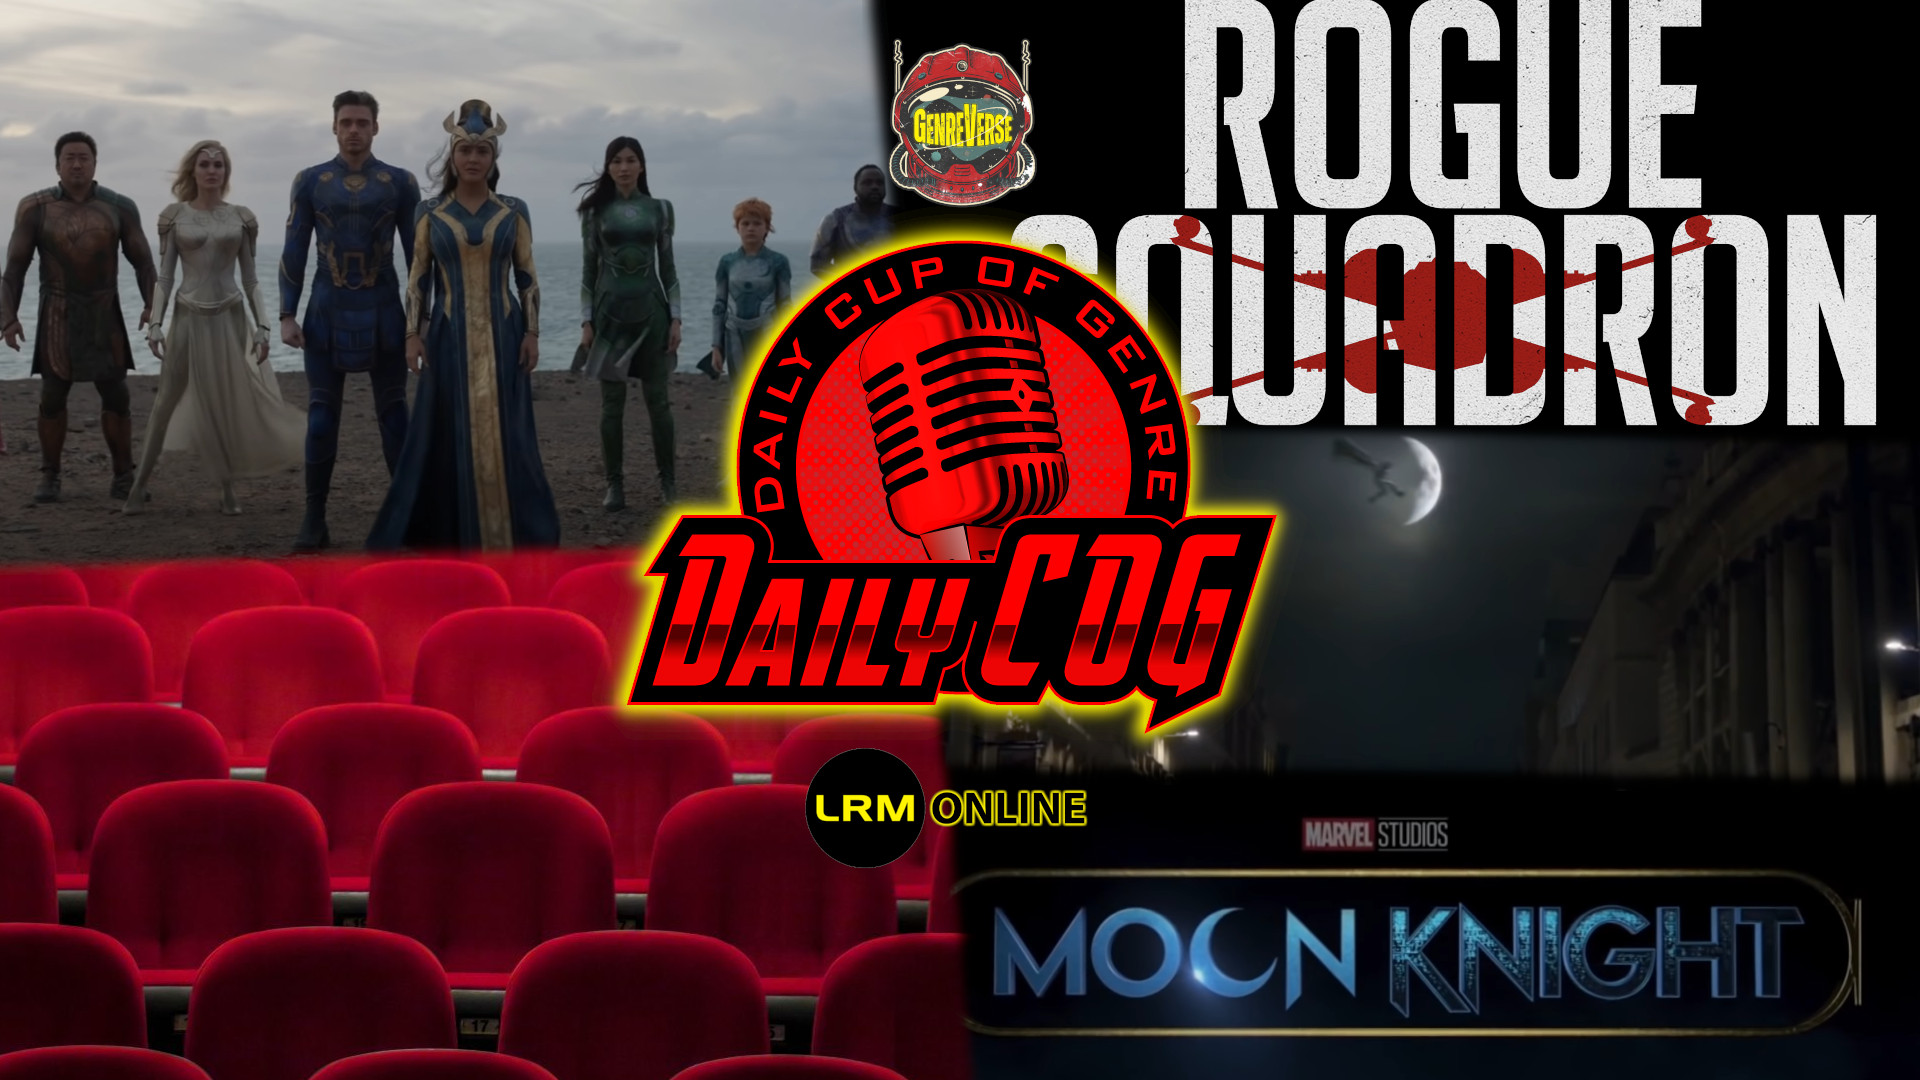 The Eternals Scores Par For Weekend Box Office (Not A Good Thing),Patty Jenkins & Rogue Squadron Delay Rumors, & That AMAZING Moon Knight Teaser | Daily COG